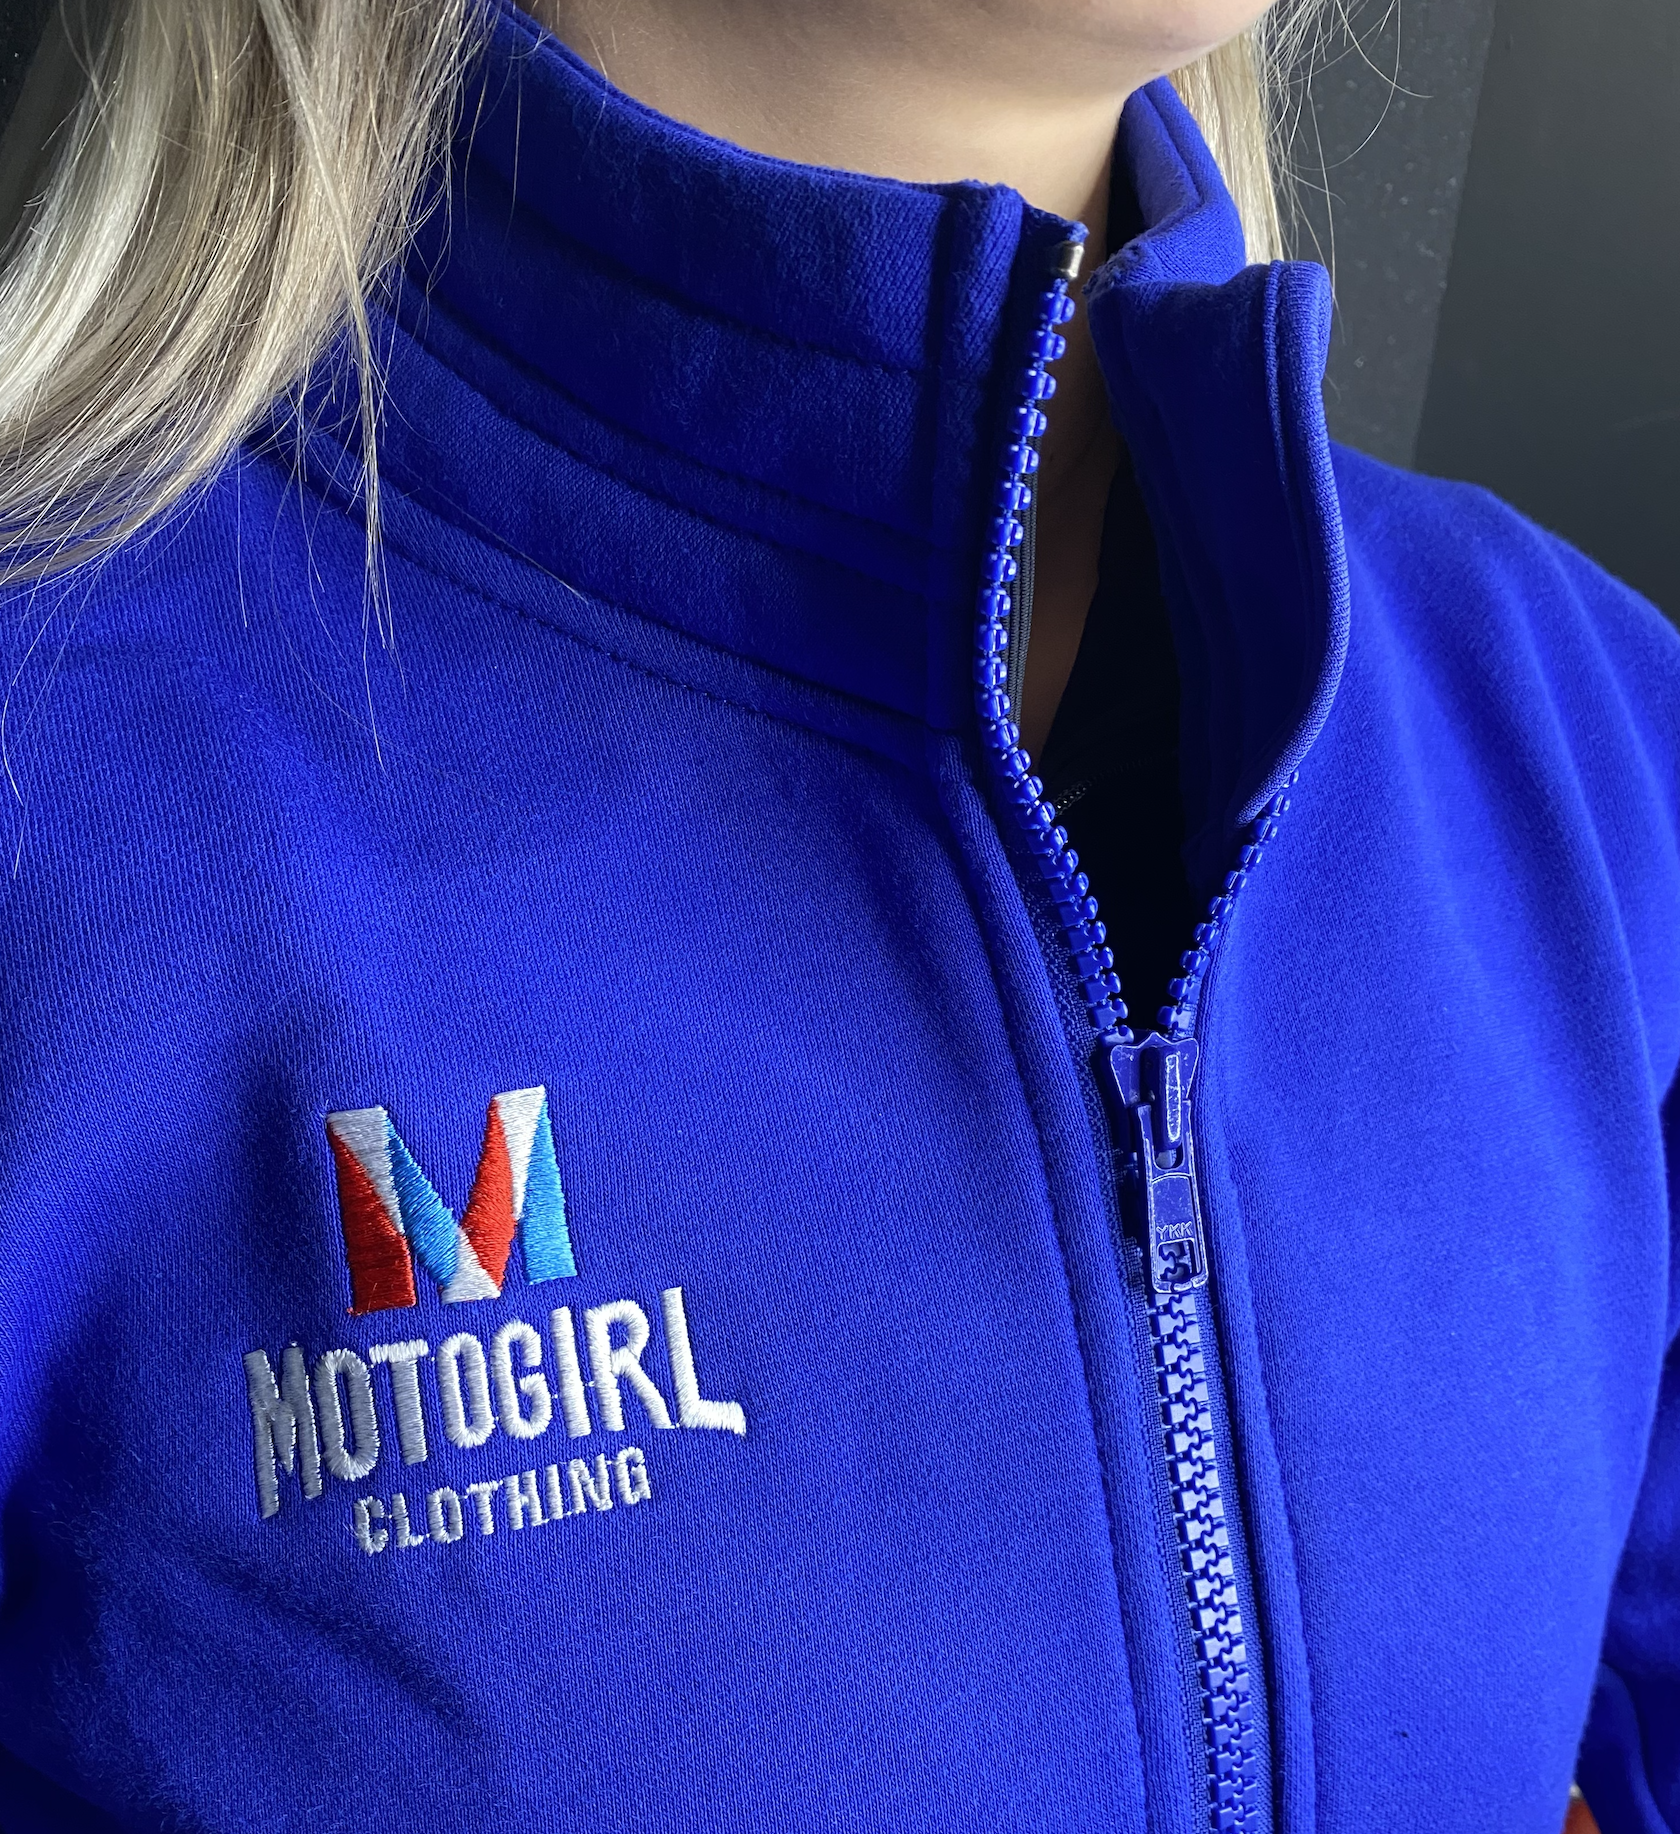 close up of woman's neck wearing Motogirl clothing blue sweatshirt with a front zip